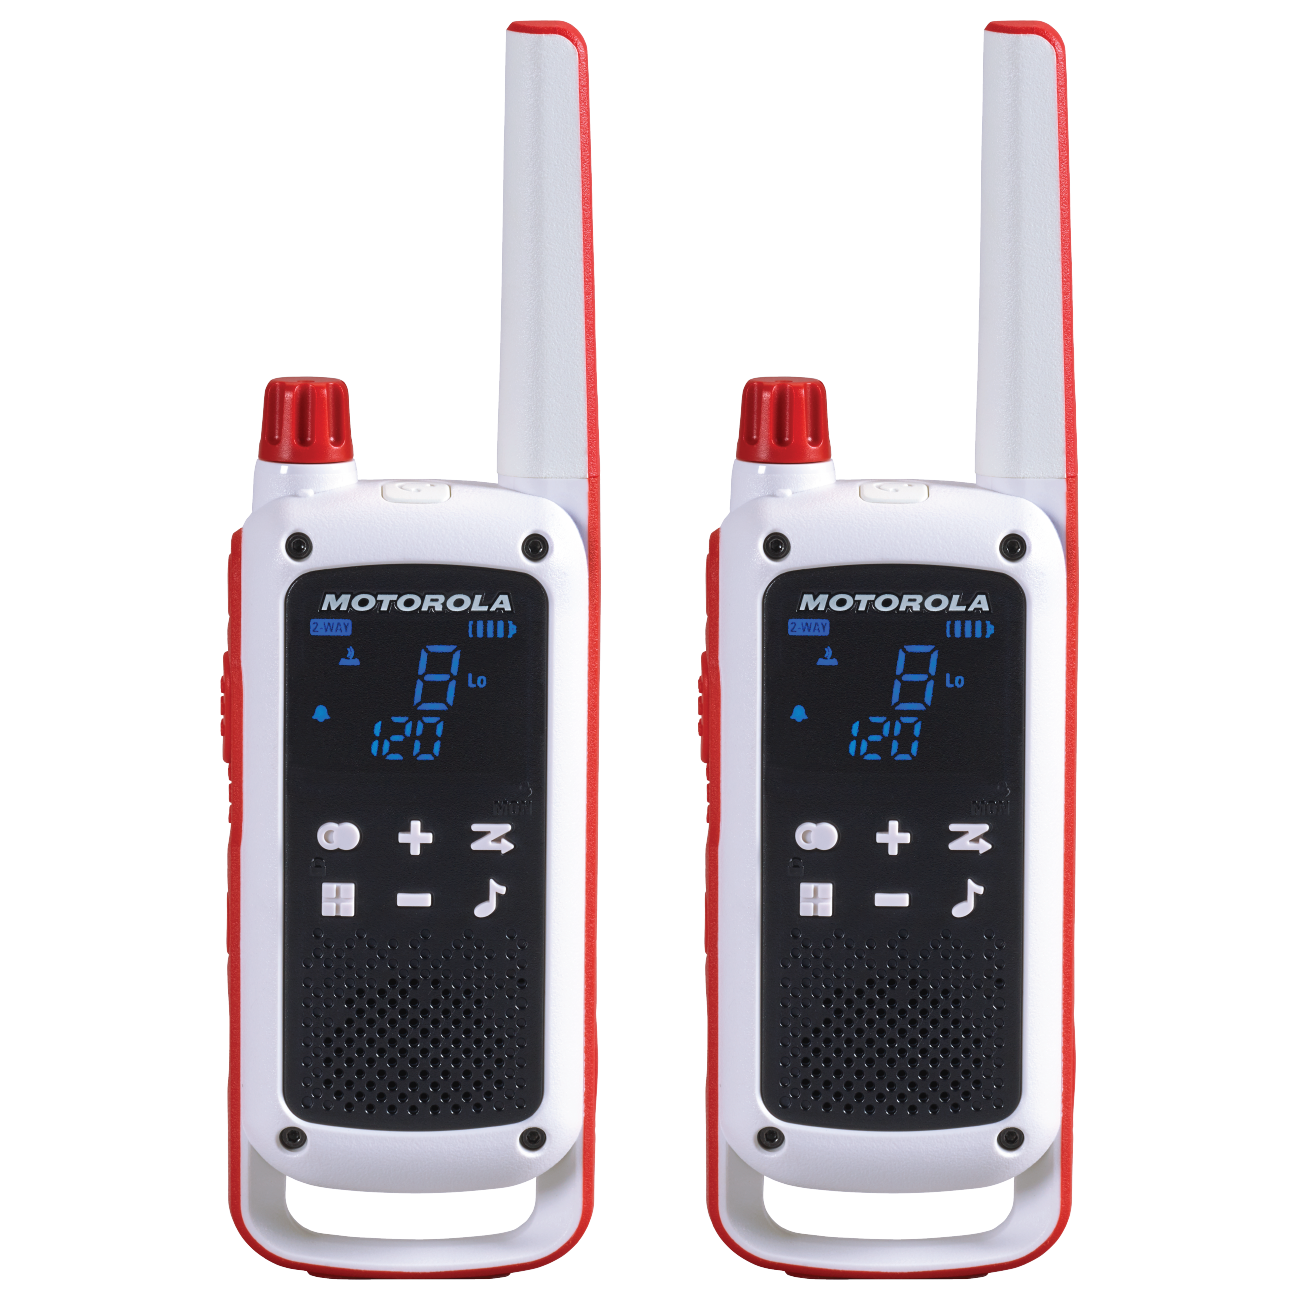 Motorola Talkabout T82 Extreme walkie talkies review  In this video we  will be looking at the Motorola Talkabout T82 Extreme walkie talkies review  We will be unboxing them then assembling them